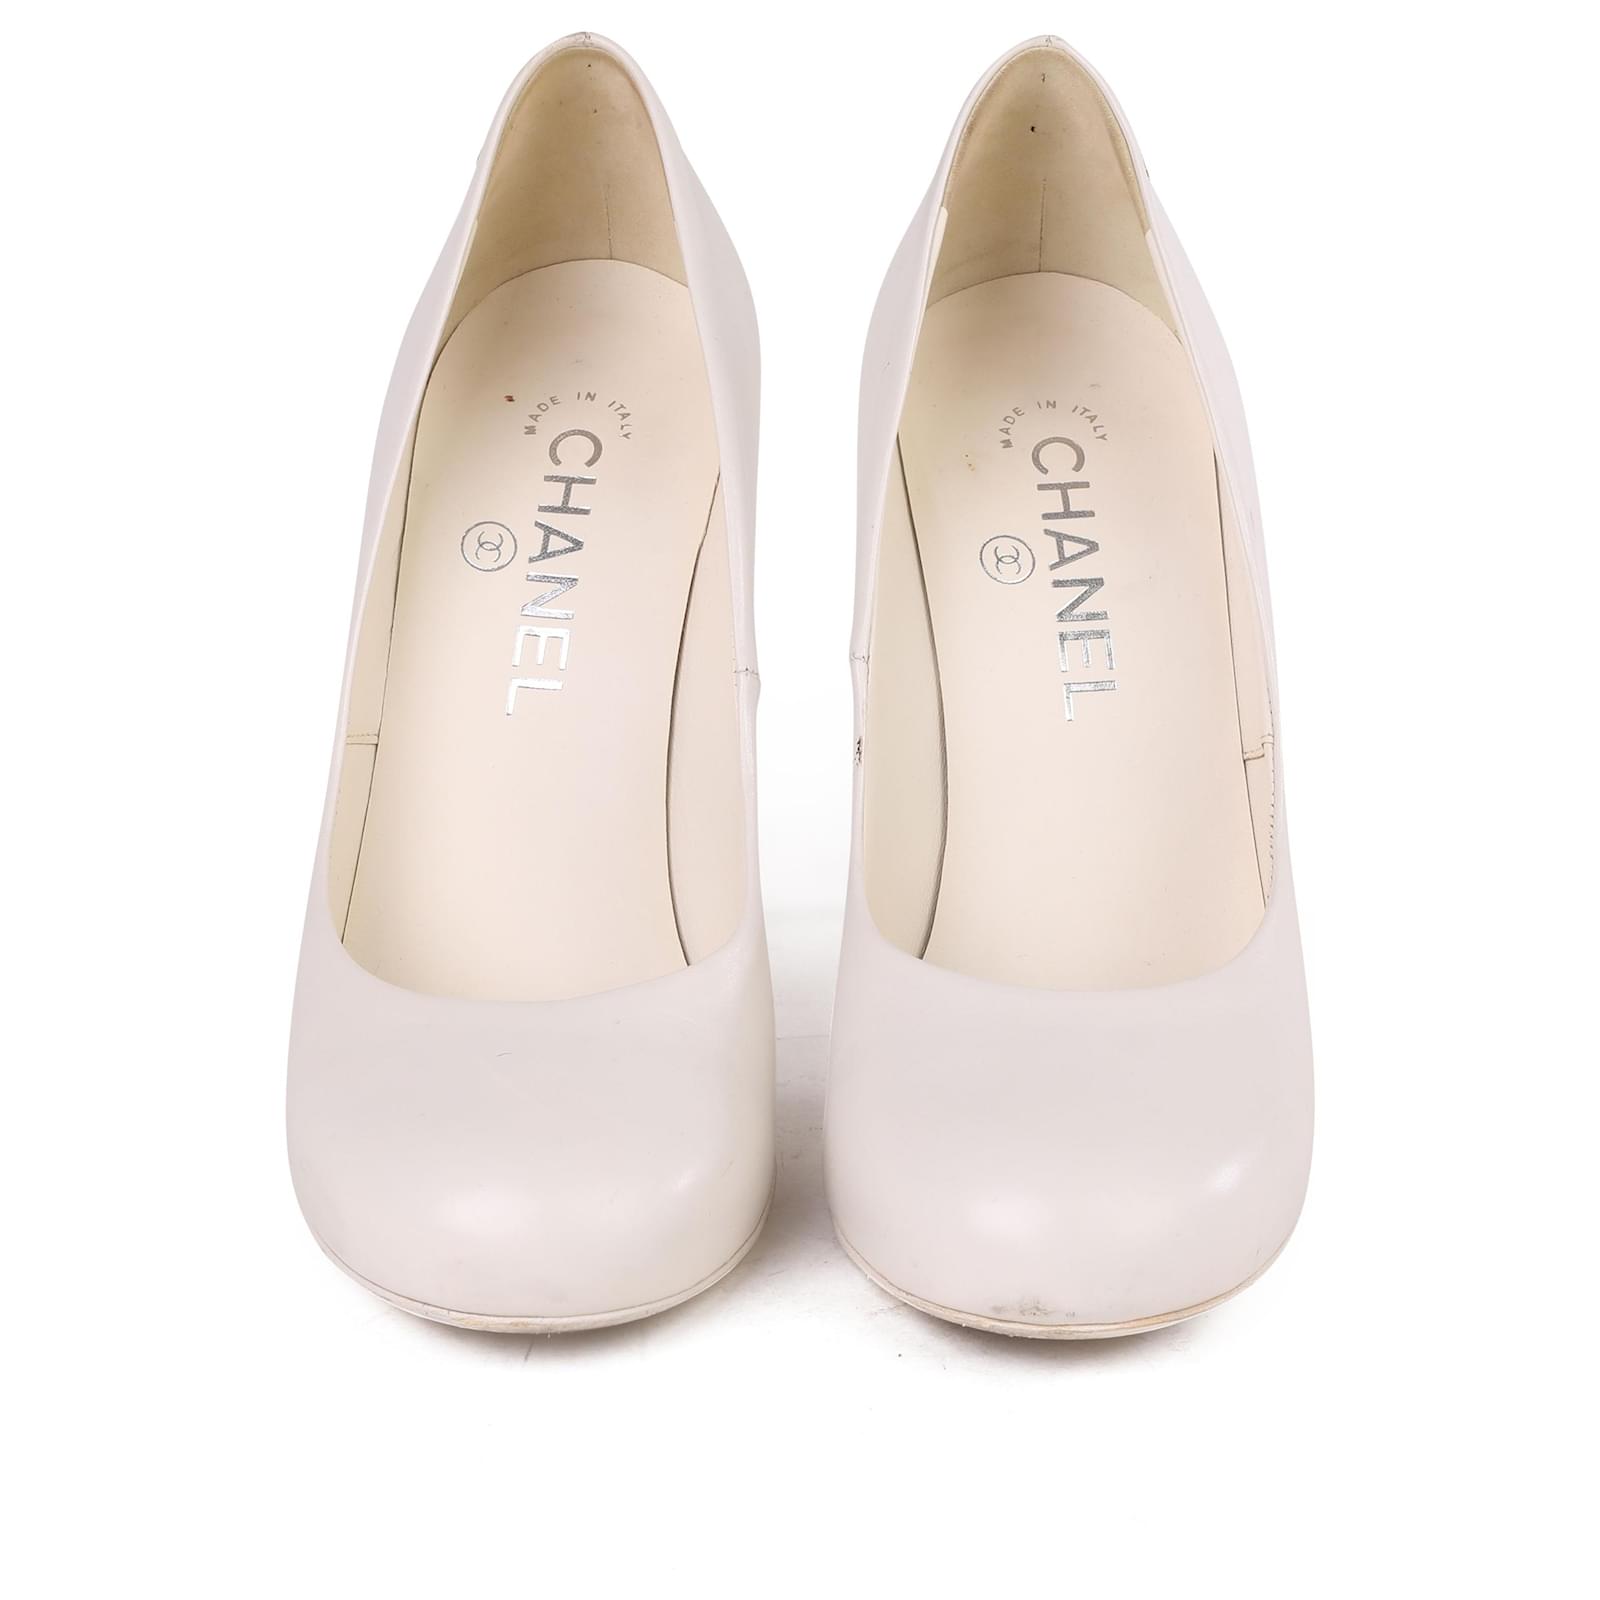 Chanel White Leather CC Pearl Embellished Heel Pumps